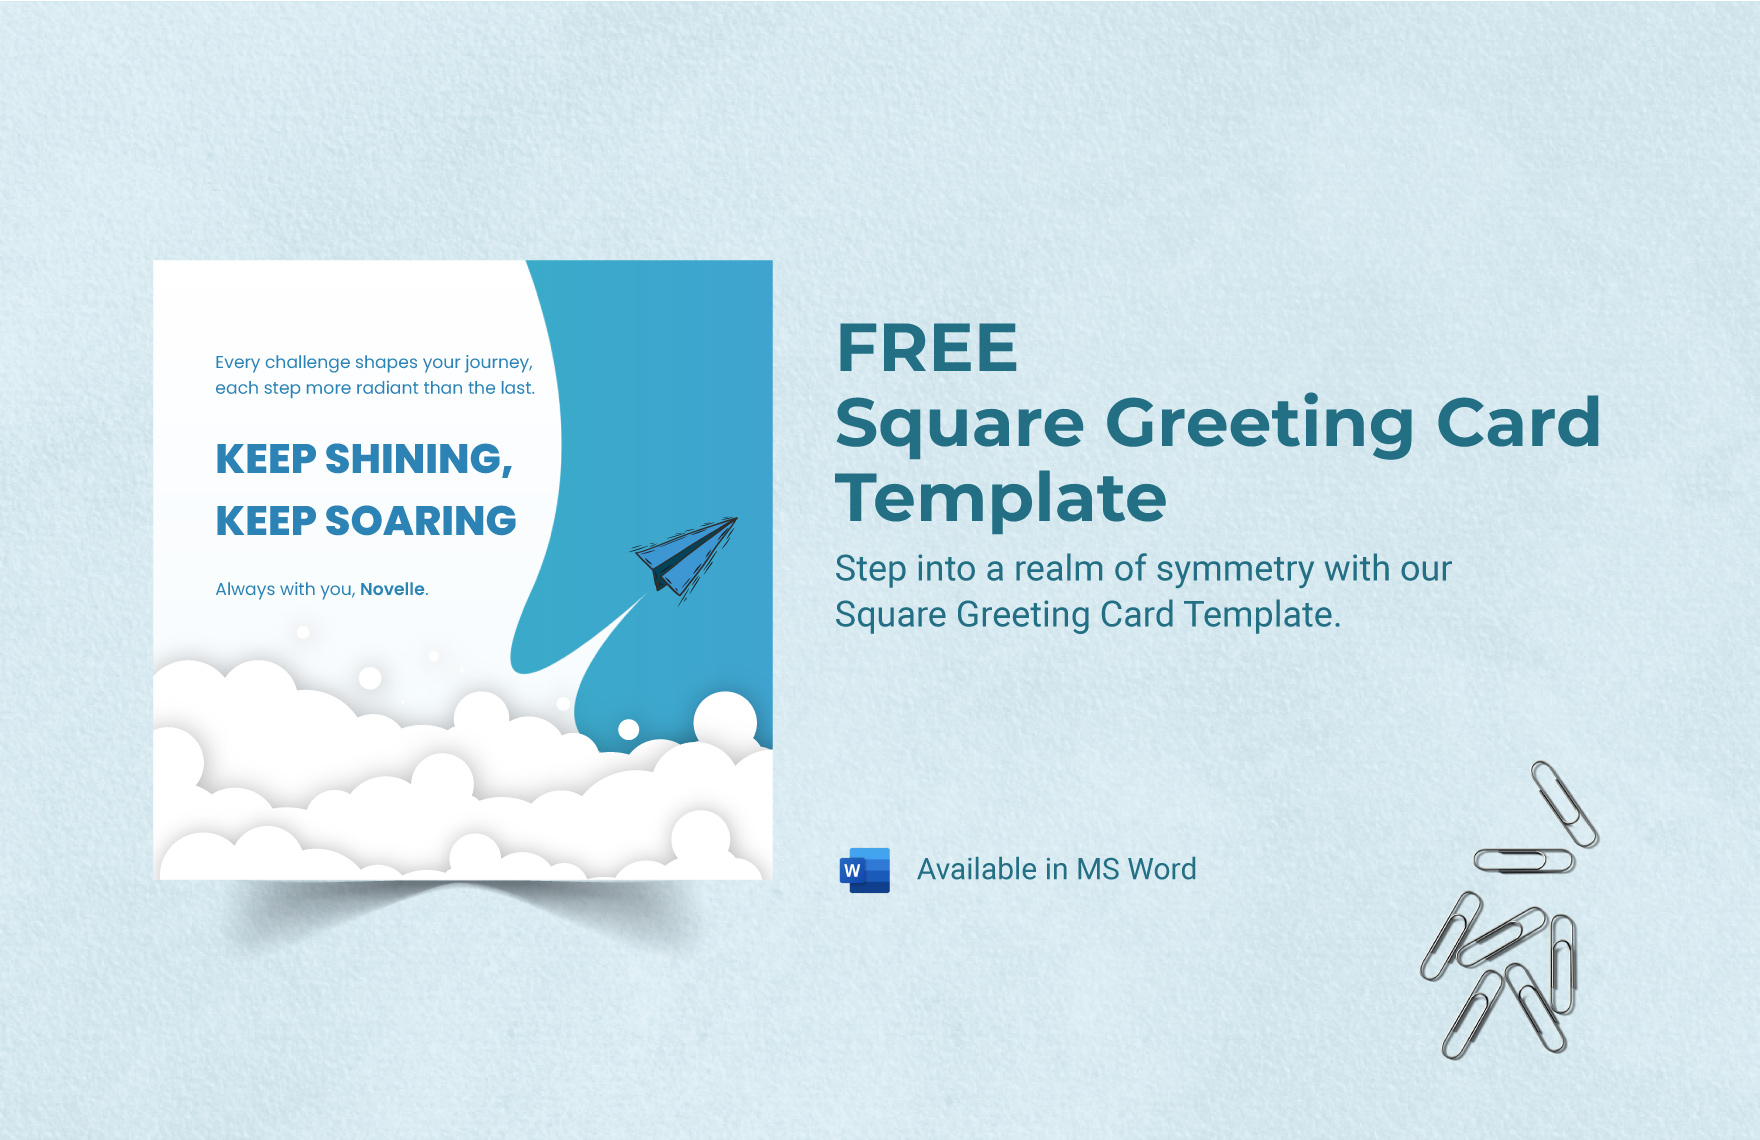 Square Greeting Card Template